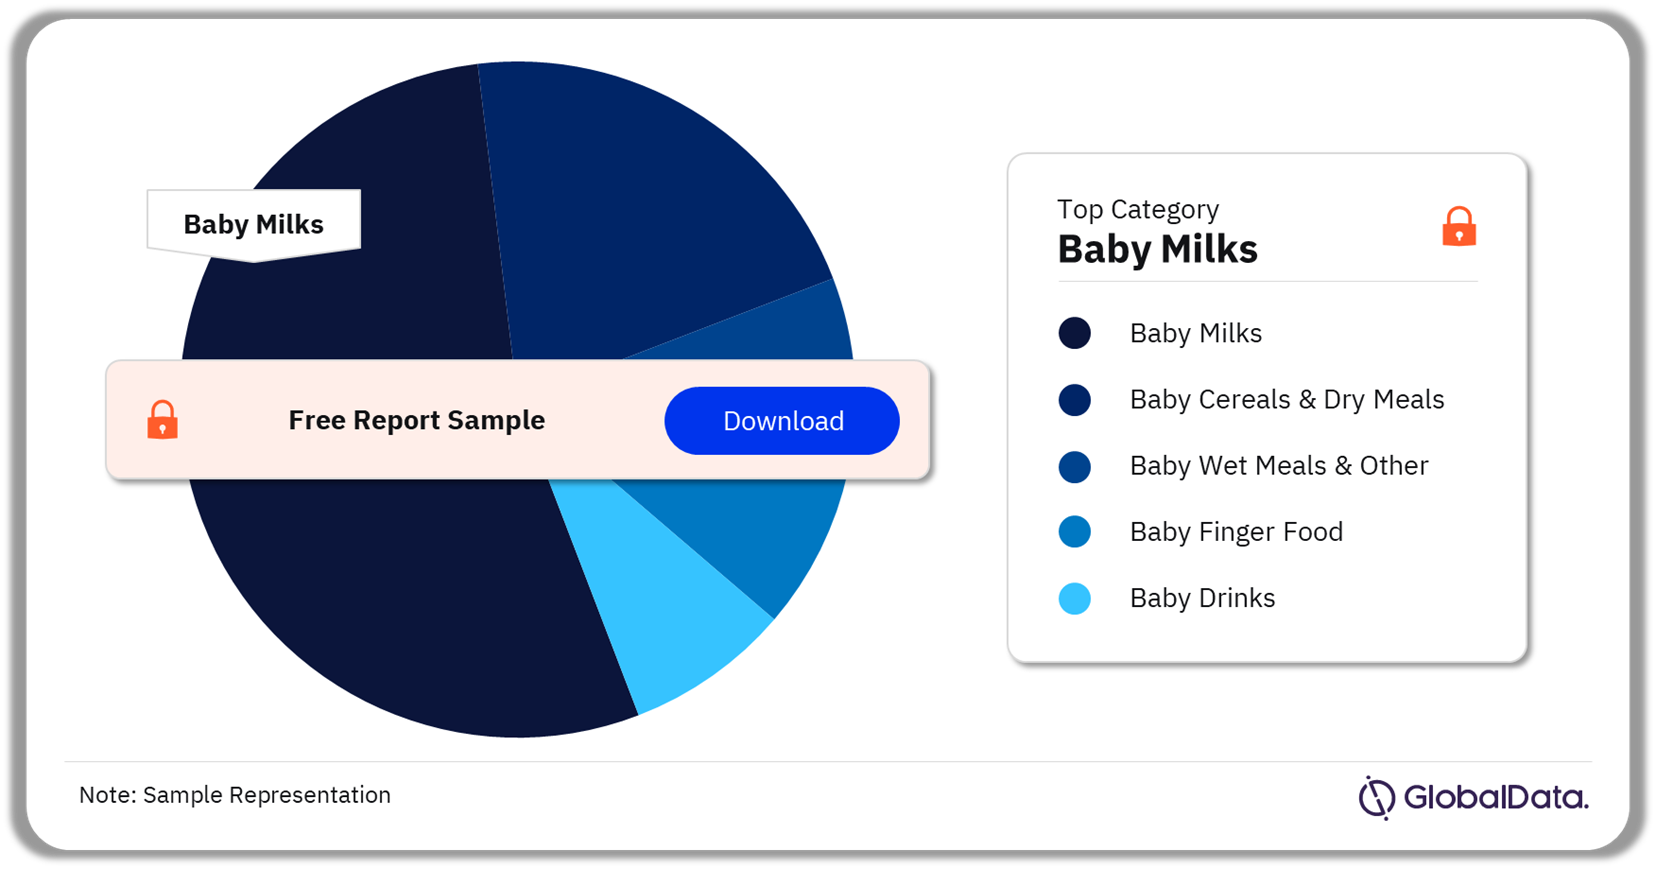 Baby milk was the leading category with the highest Austria baby food market value in 2022